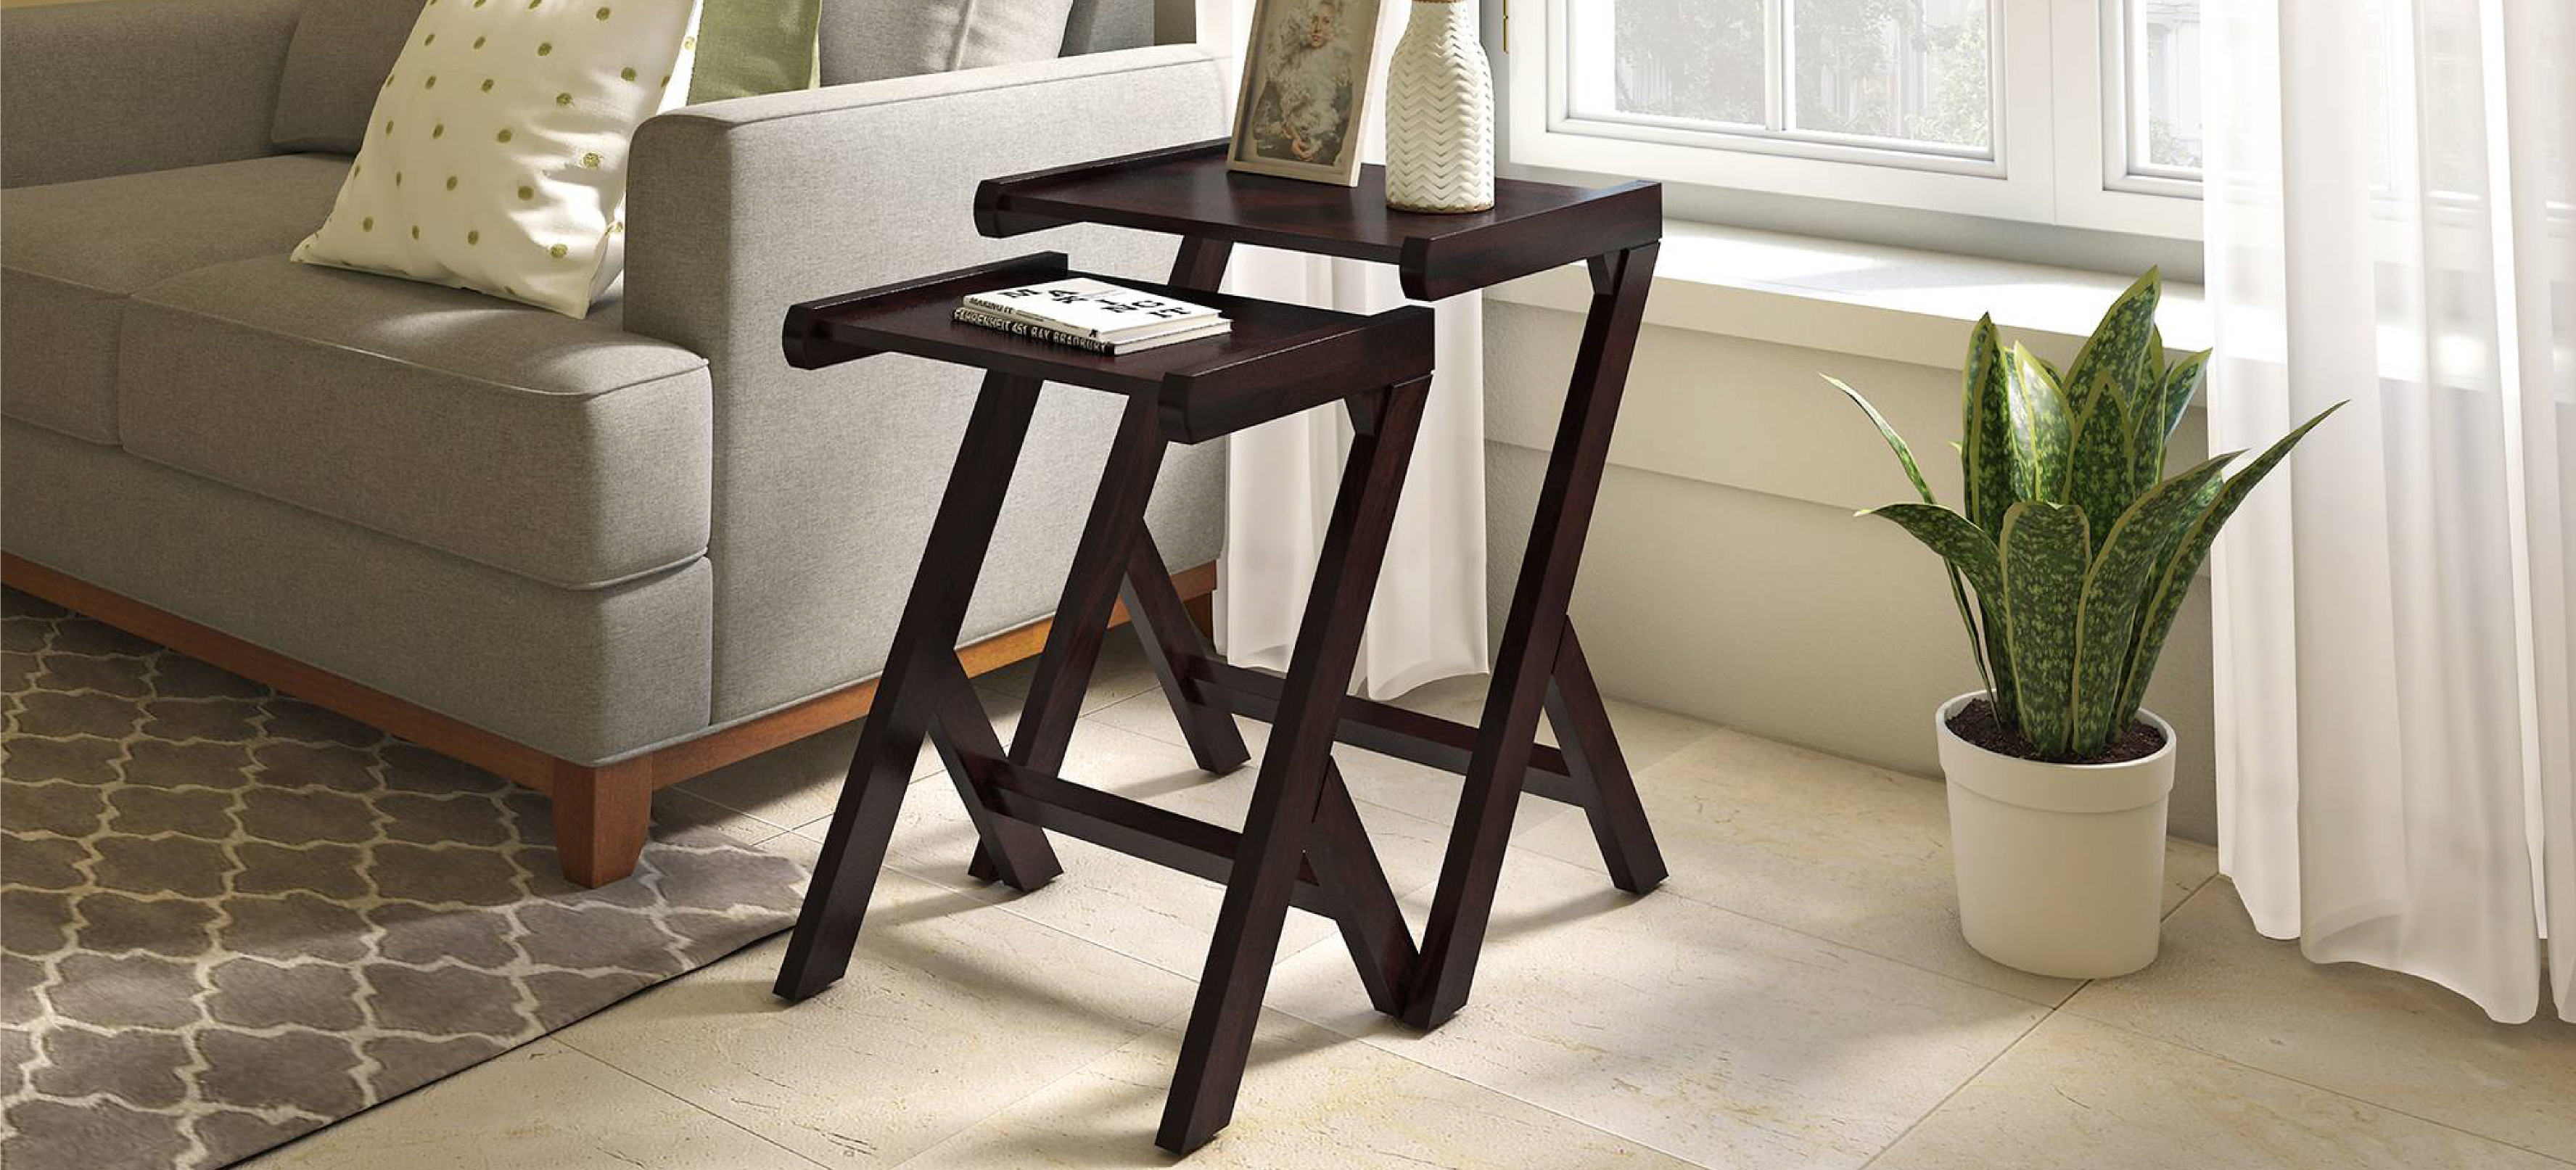 https://www.ulcdn.net/media/collection%20and%20listing/The_Nested_Coffee_Table_A_Space-Saving_Solution_for_Your_Home.jpg?1683184043